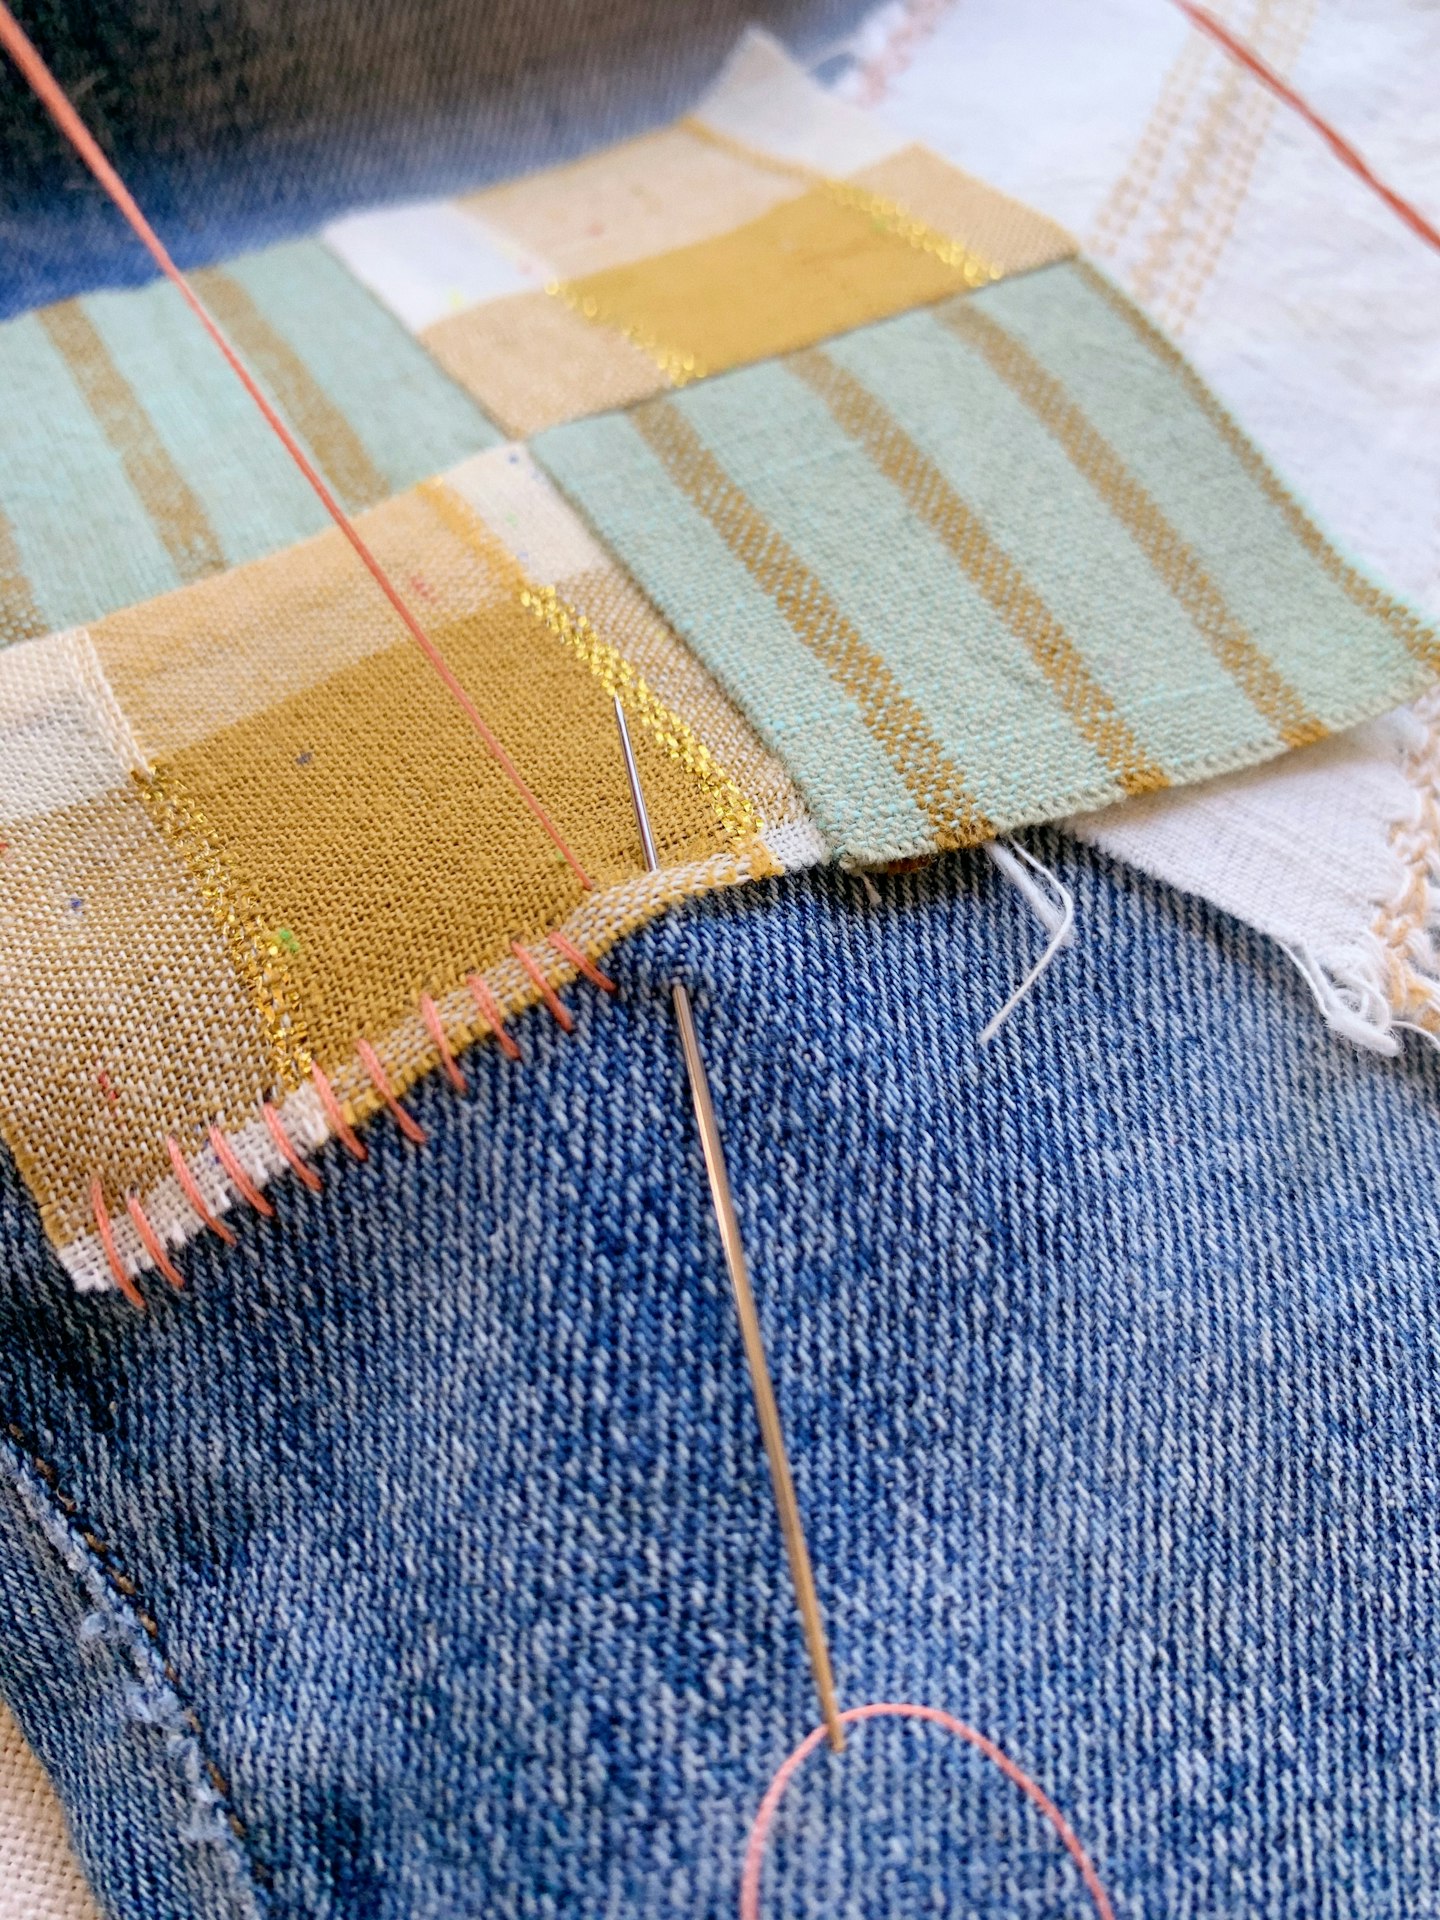 patchworking jeans